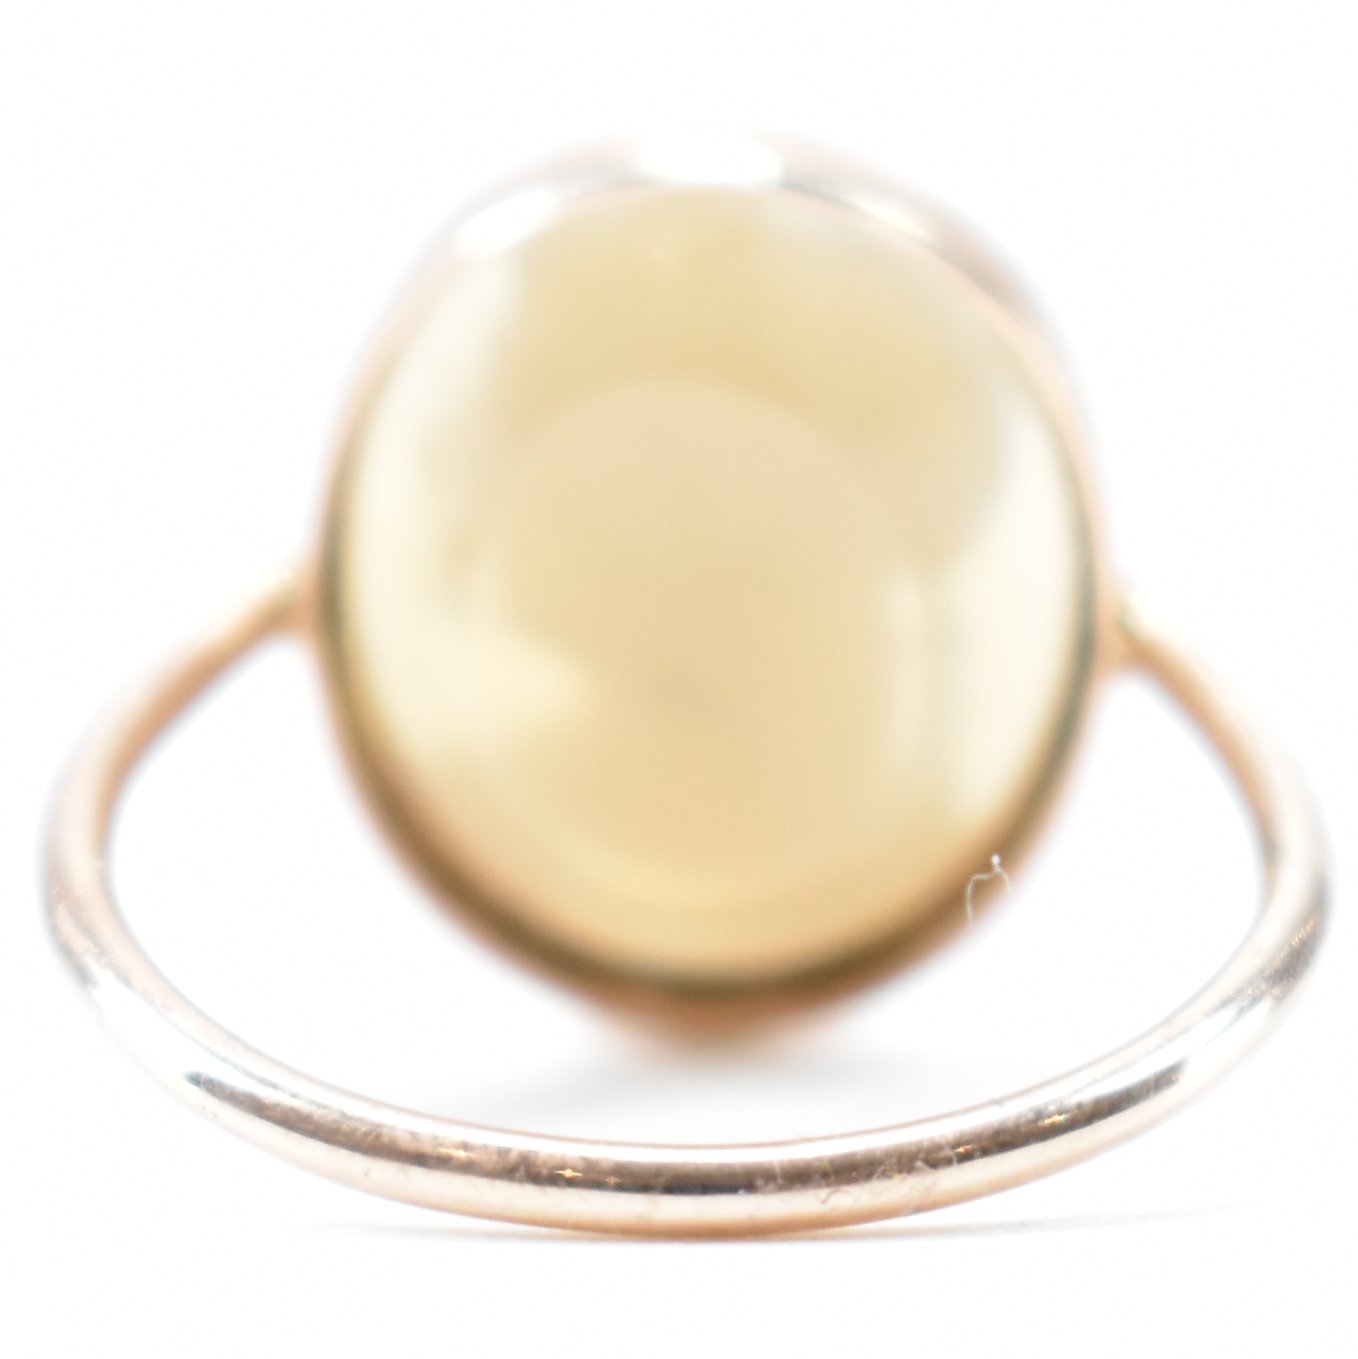 VINTAGE GOLD & AGATE CARVED CAMEO RING - Image 4 of 7